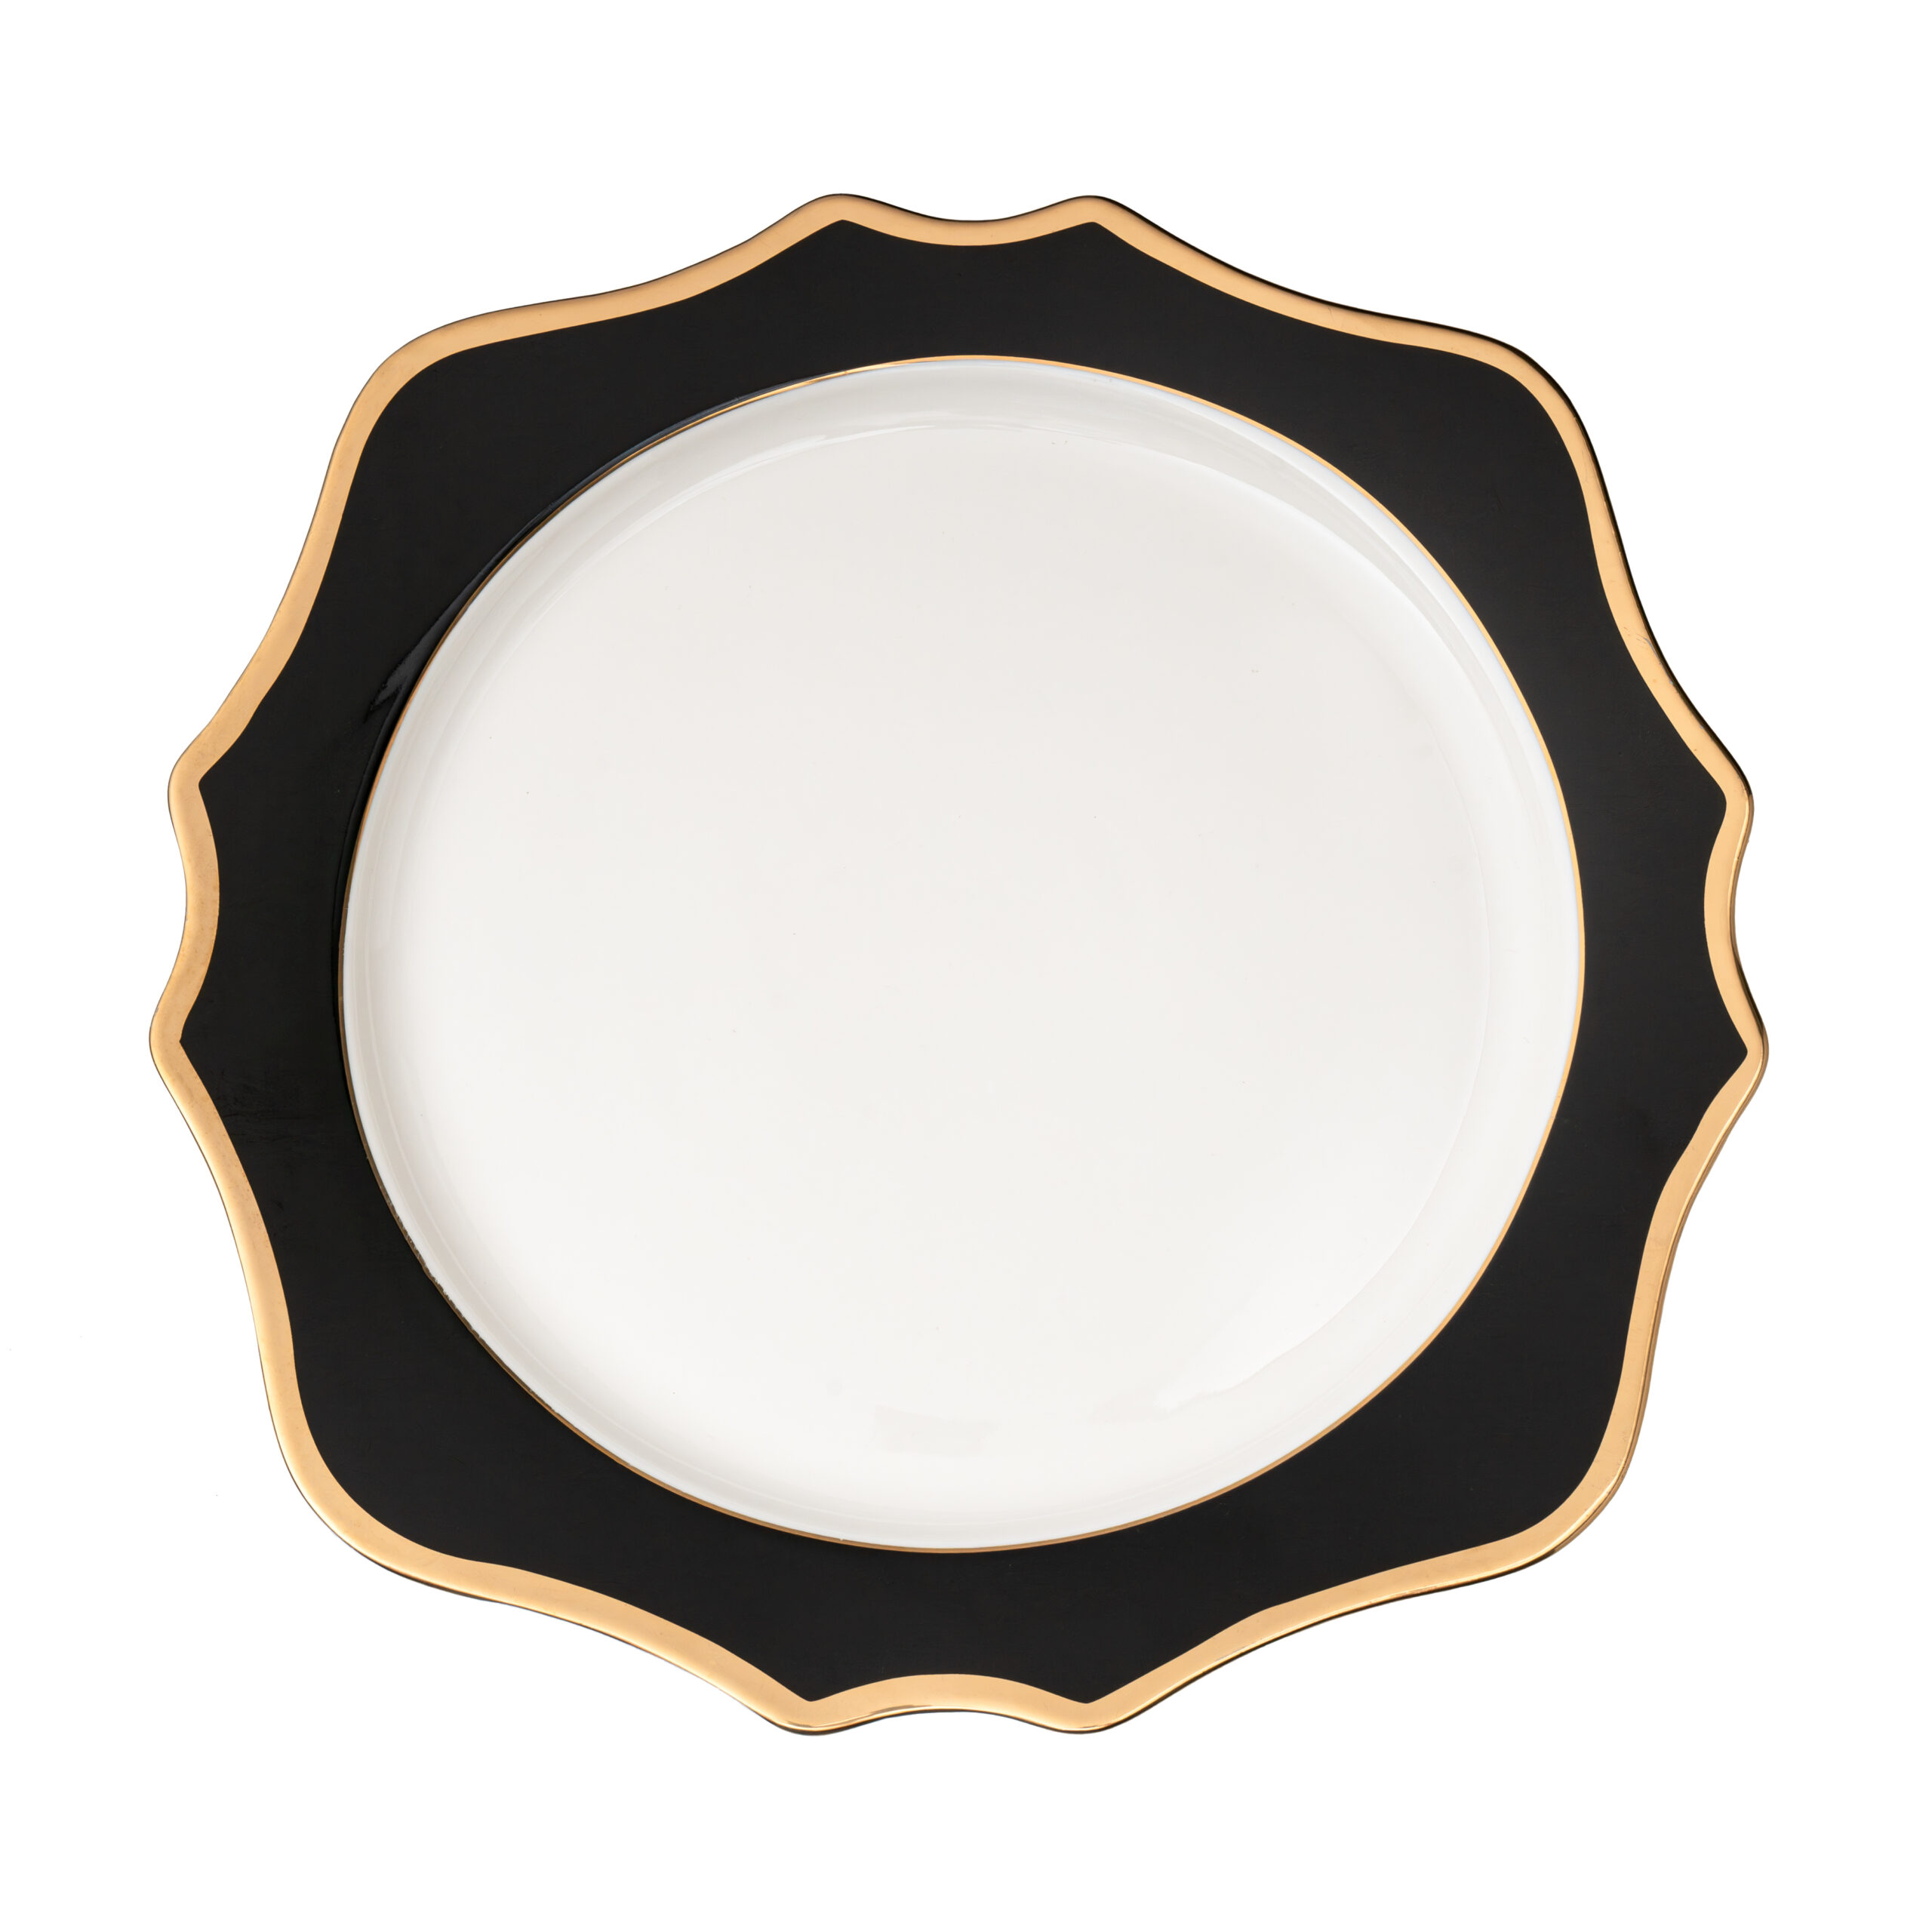 The Sunflower Black Gold Dinnerware Collection Charger Plate